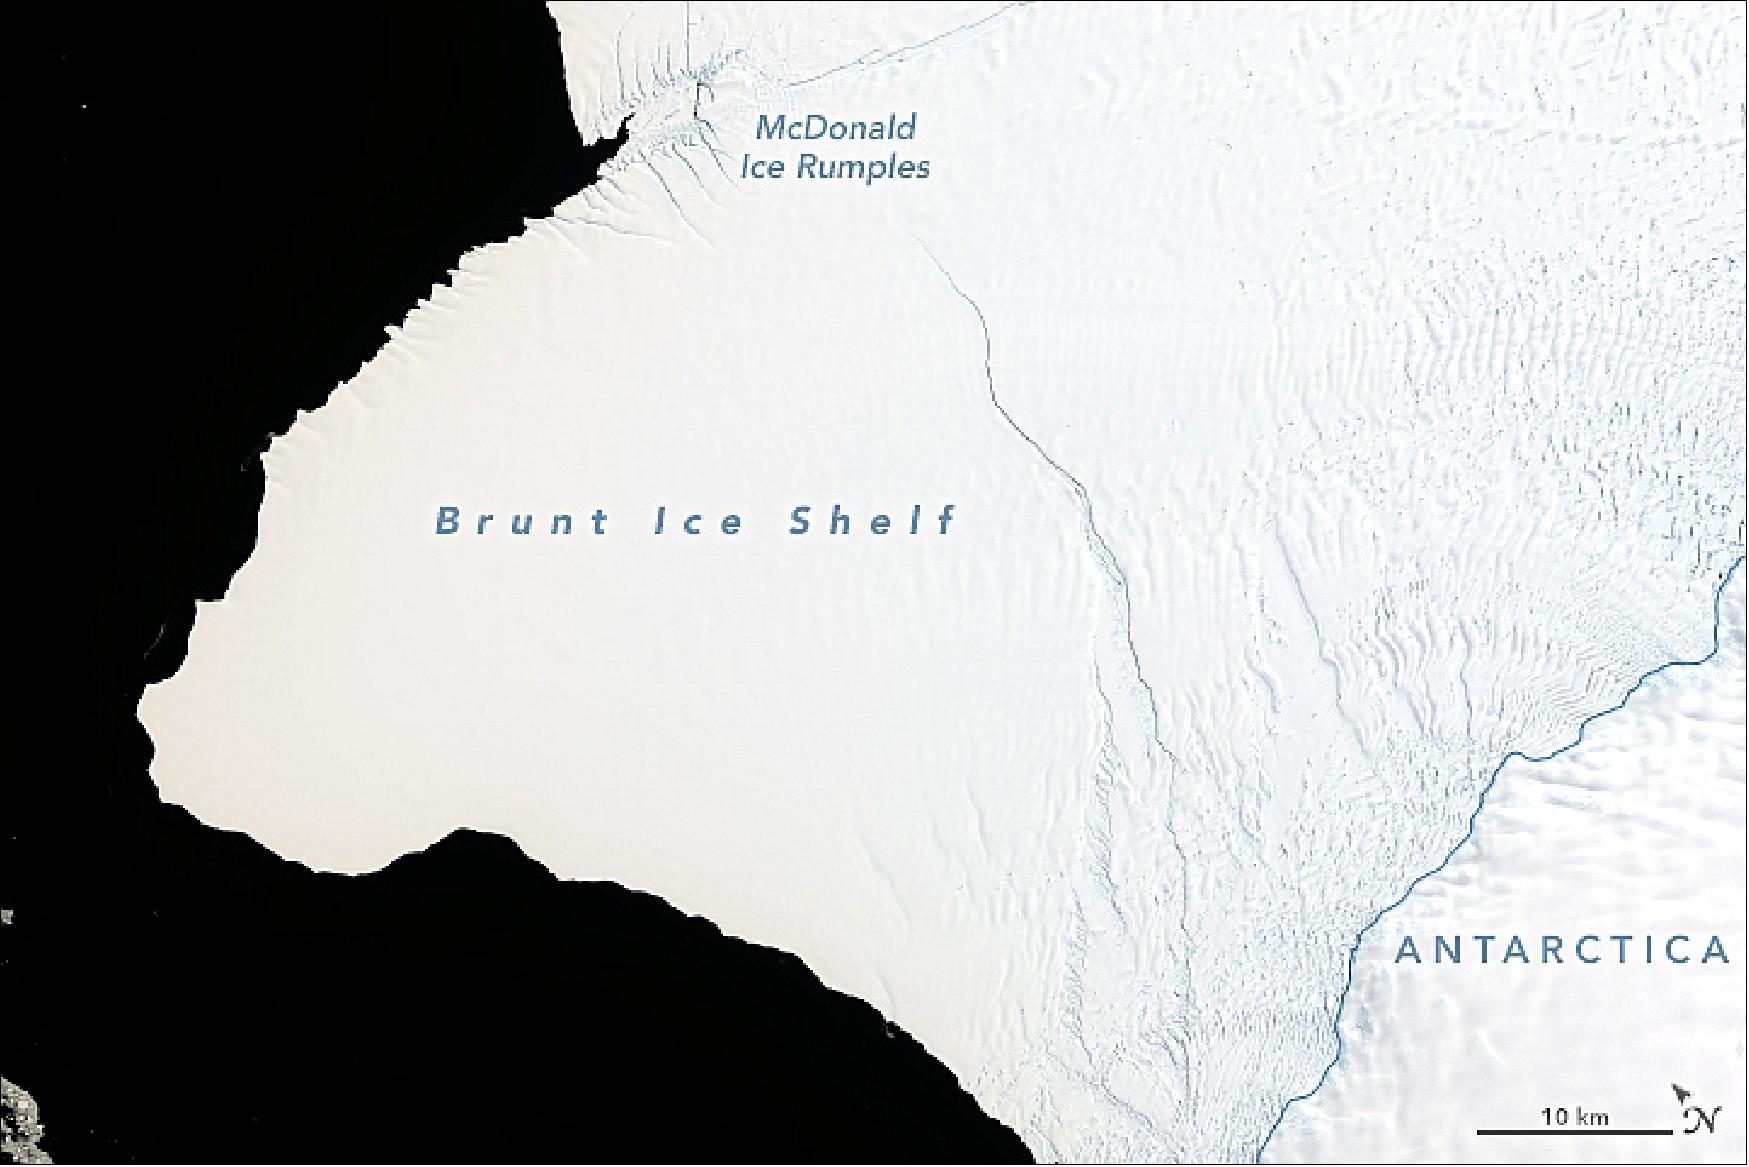 Figure 108: Antarctica's Brunt Ice Shelf acquired with OLI on Landsat-8 on 23 January 2019. Cracks growing across the ice shelf are poised to release an iceberg about twice size of New York City (image credit: NASA Earth Observatory image by Joshua Stevens, using Landsat data from the U.S. Geological Survey. Story by Kathryn Hansen, with image interpretation by Chris Shuman)